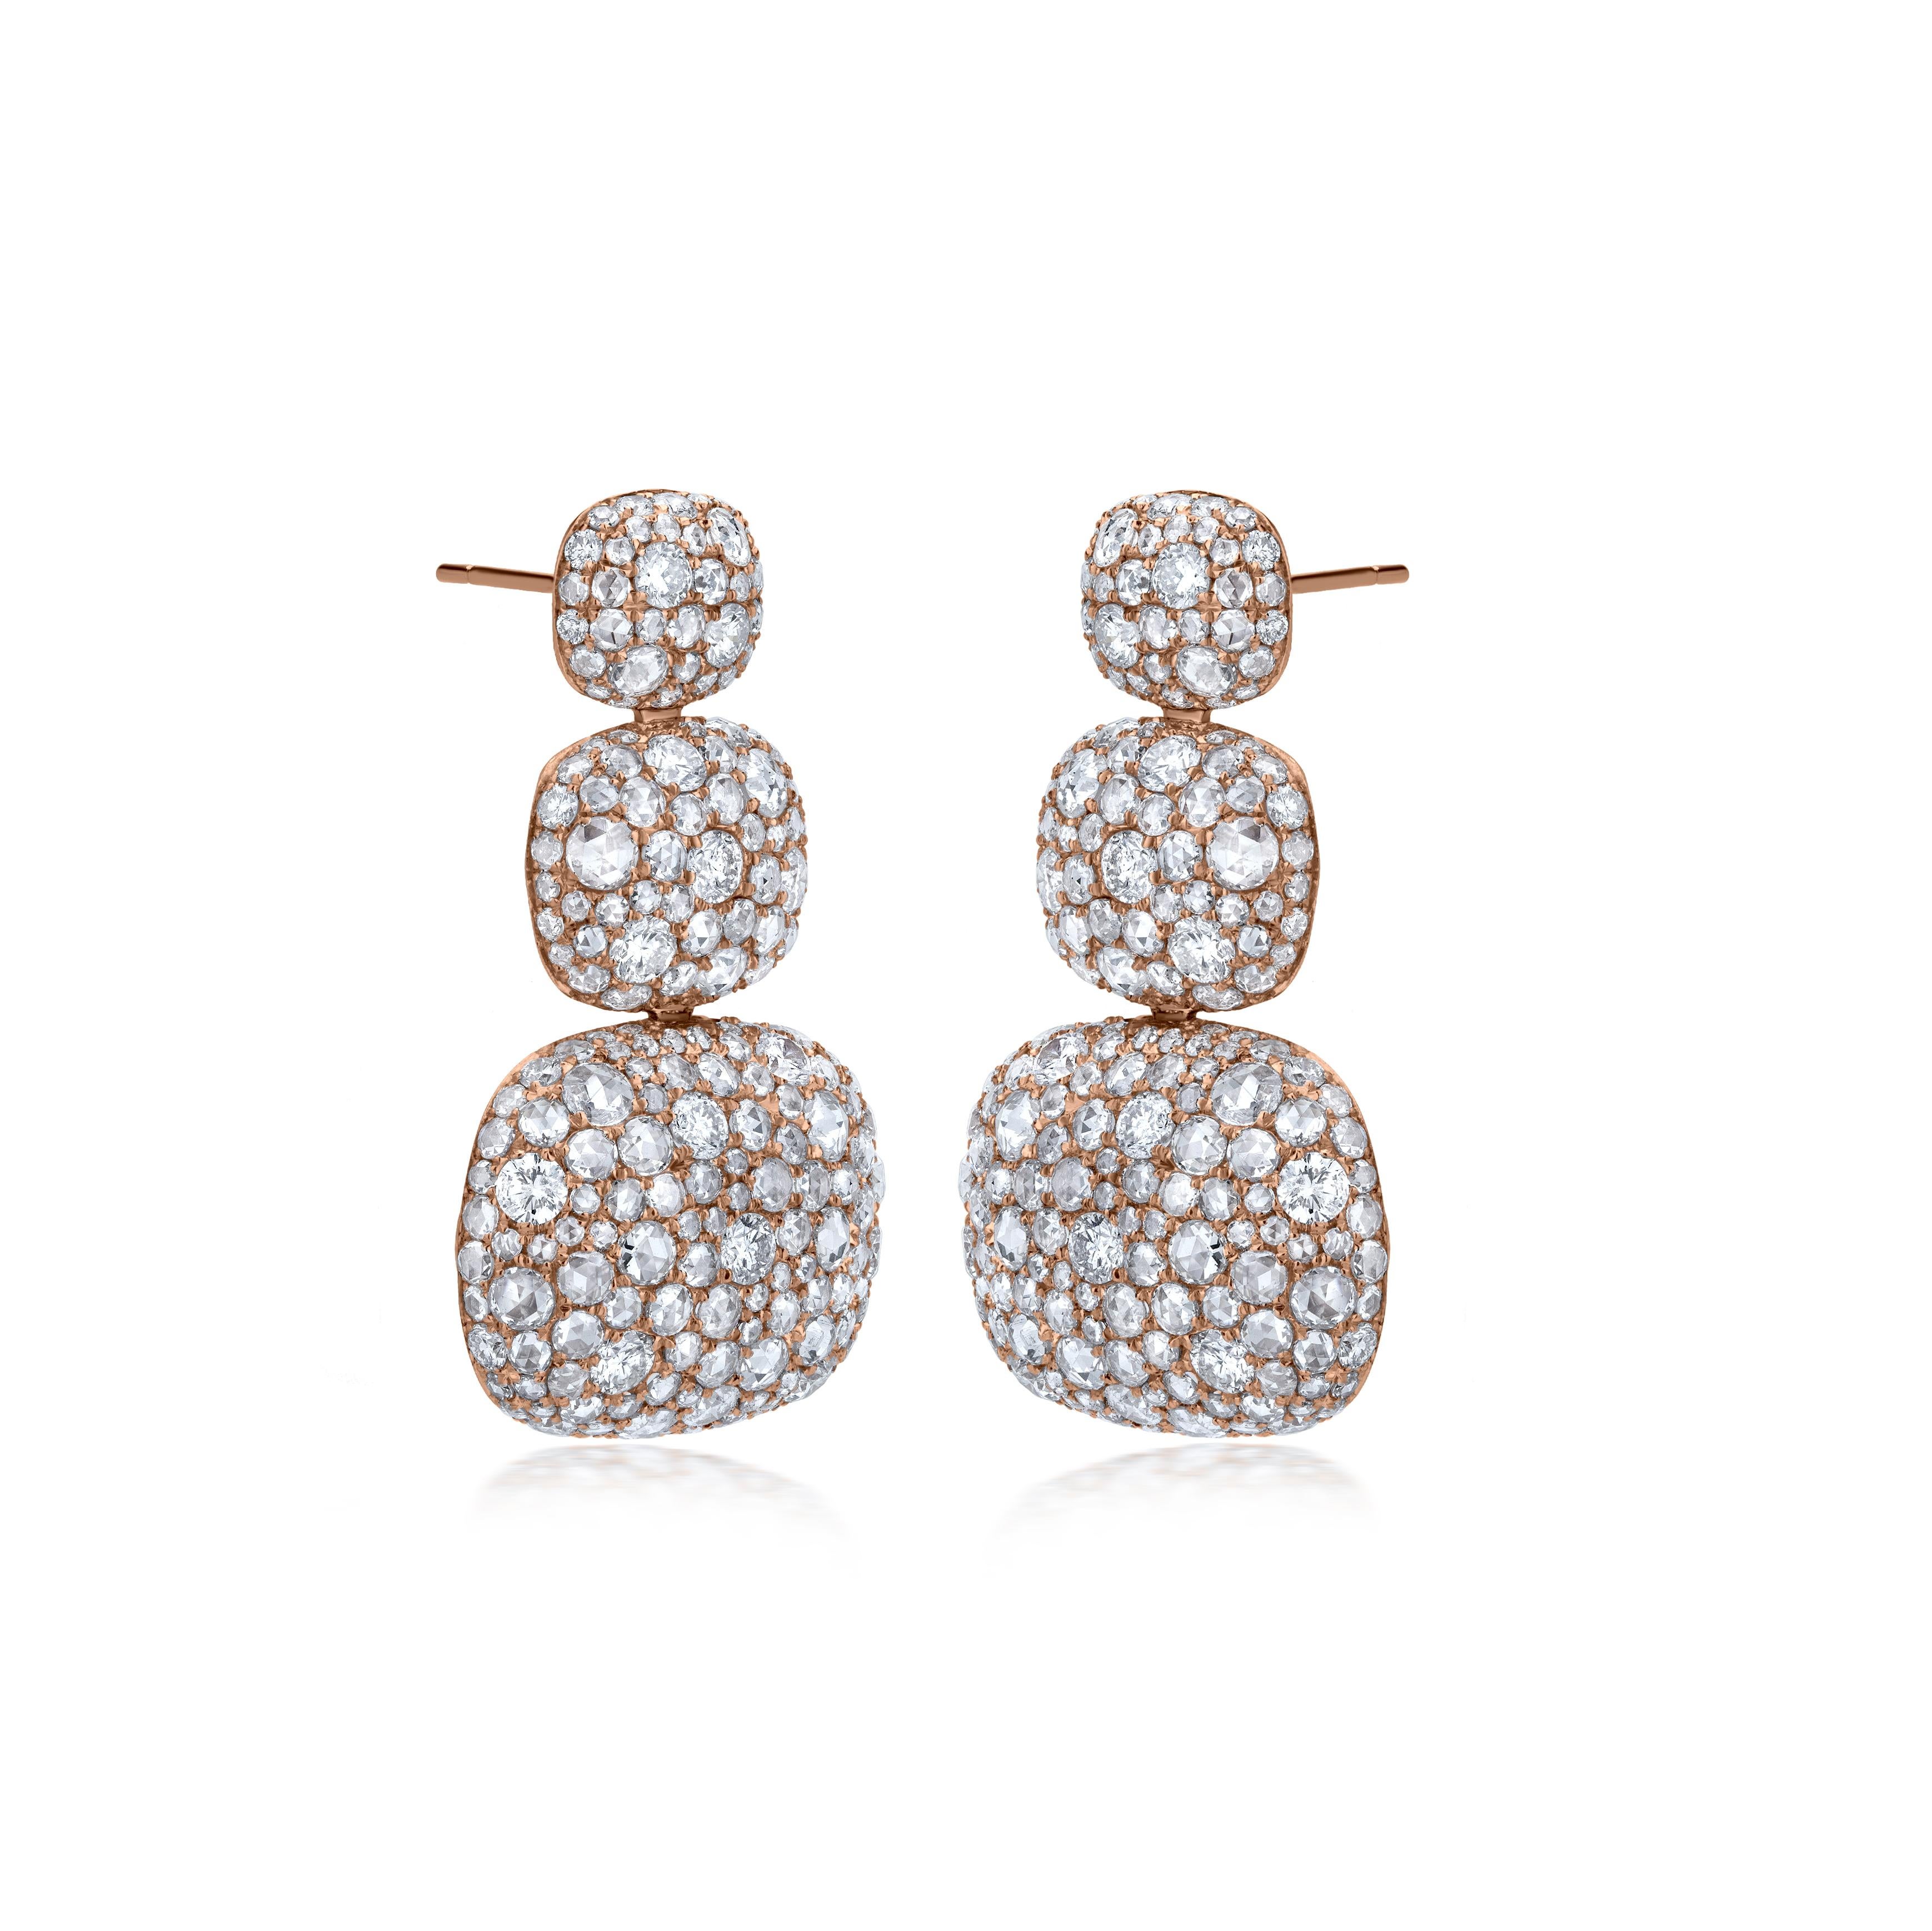 This gleaming Nigaam Dangle earring features three- graduating diamond studded drops mounted on 18k rose gold. The 7.65-carat round-rose cut diamonds are prong set and have G-H color and SI1 & I1 clarity. The Dangle earring comes with a push-button